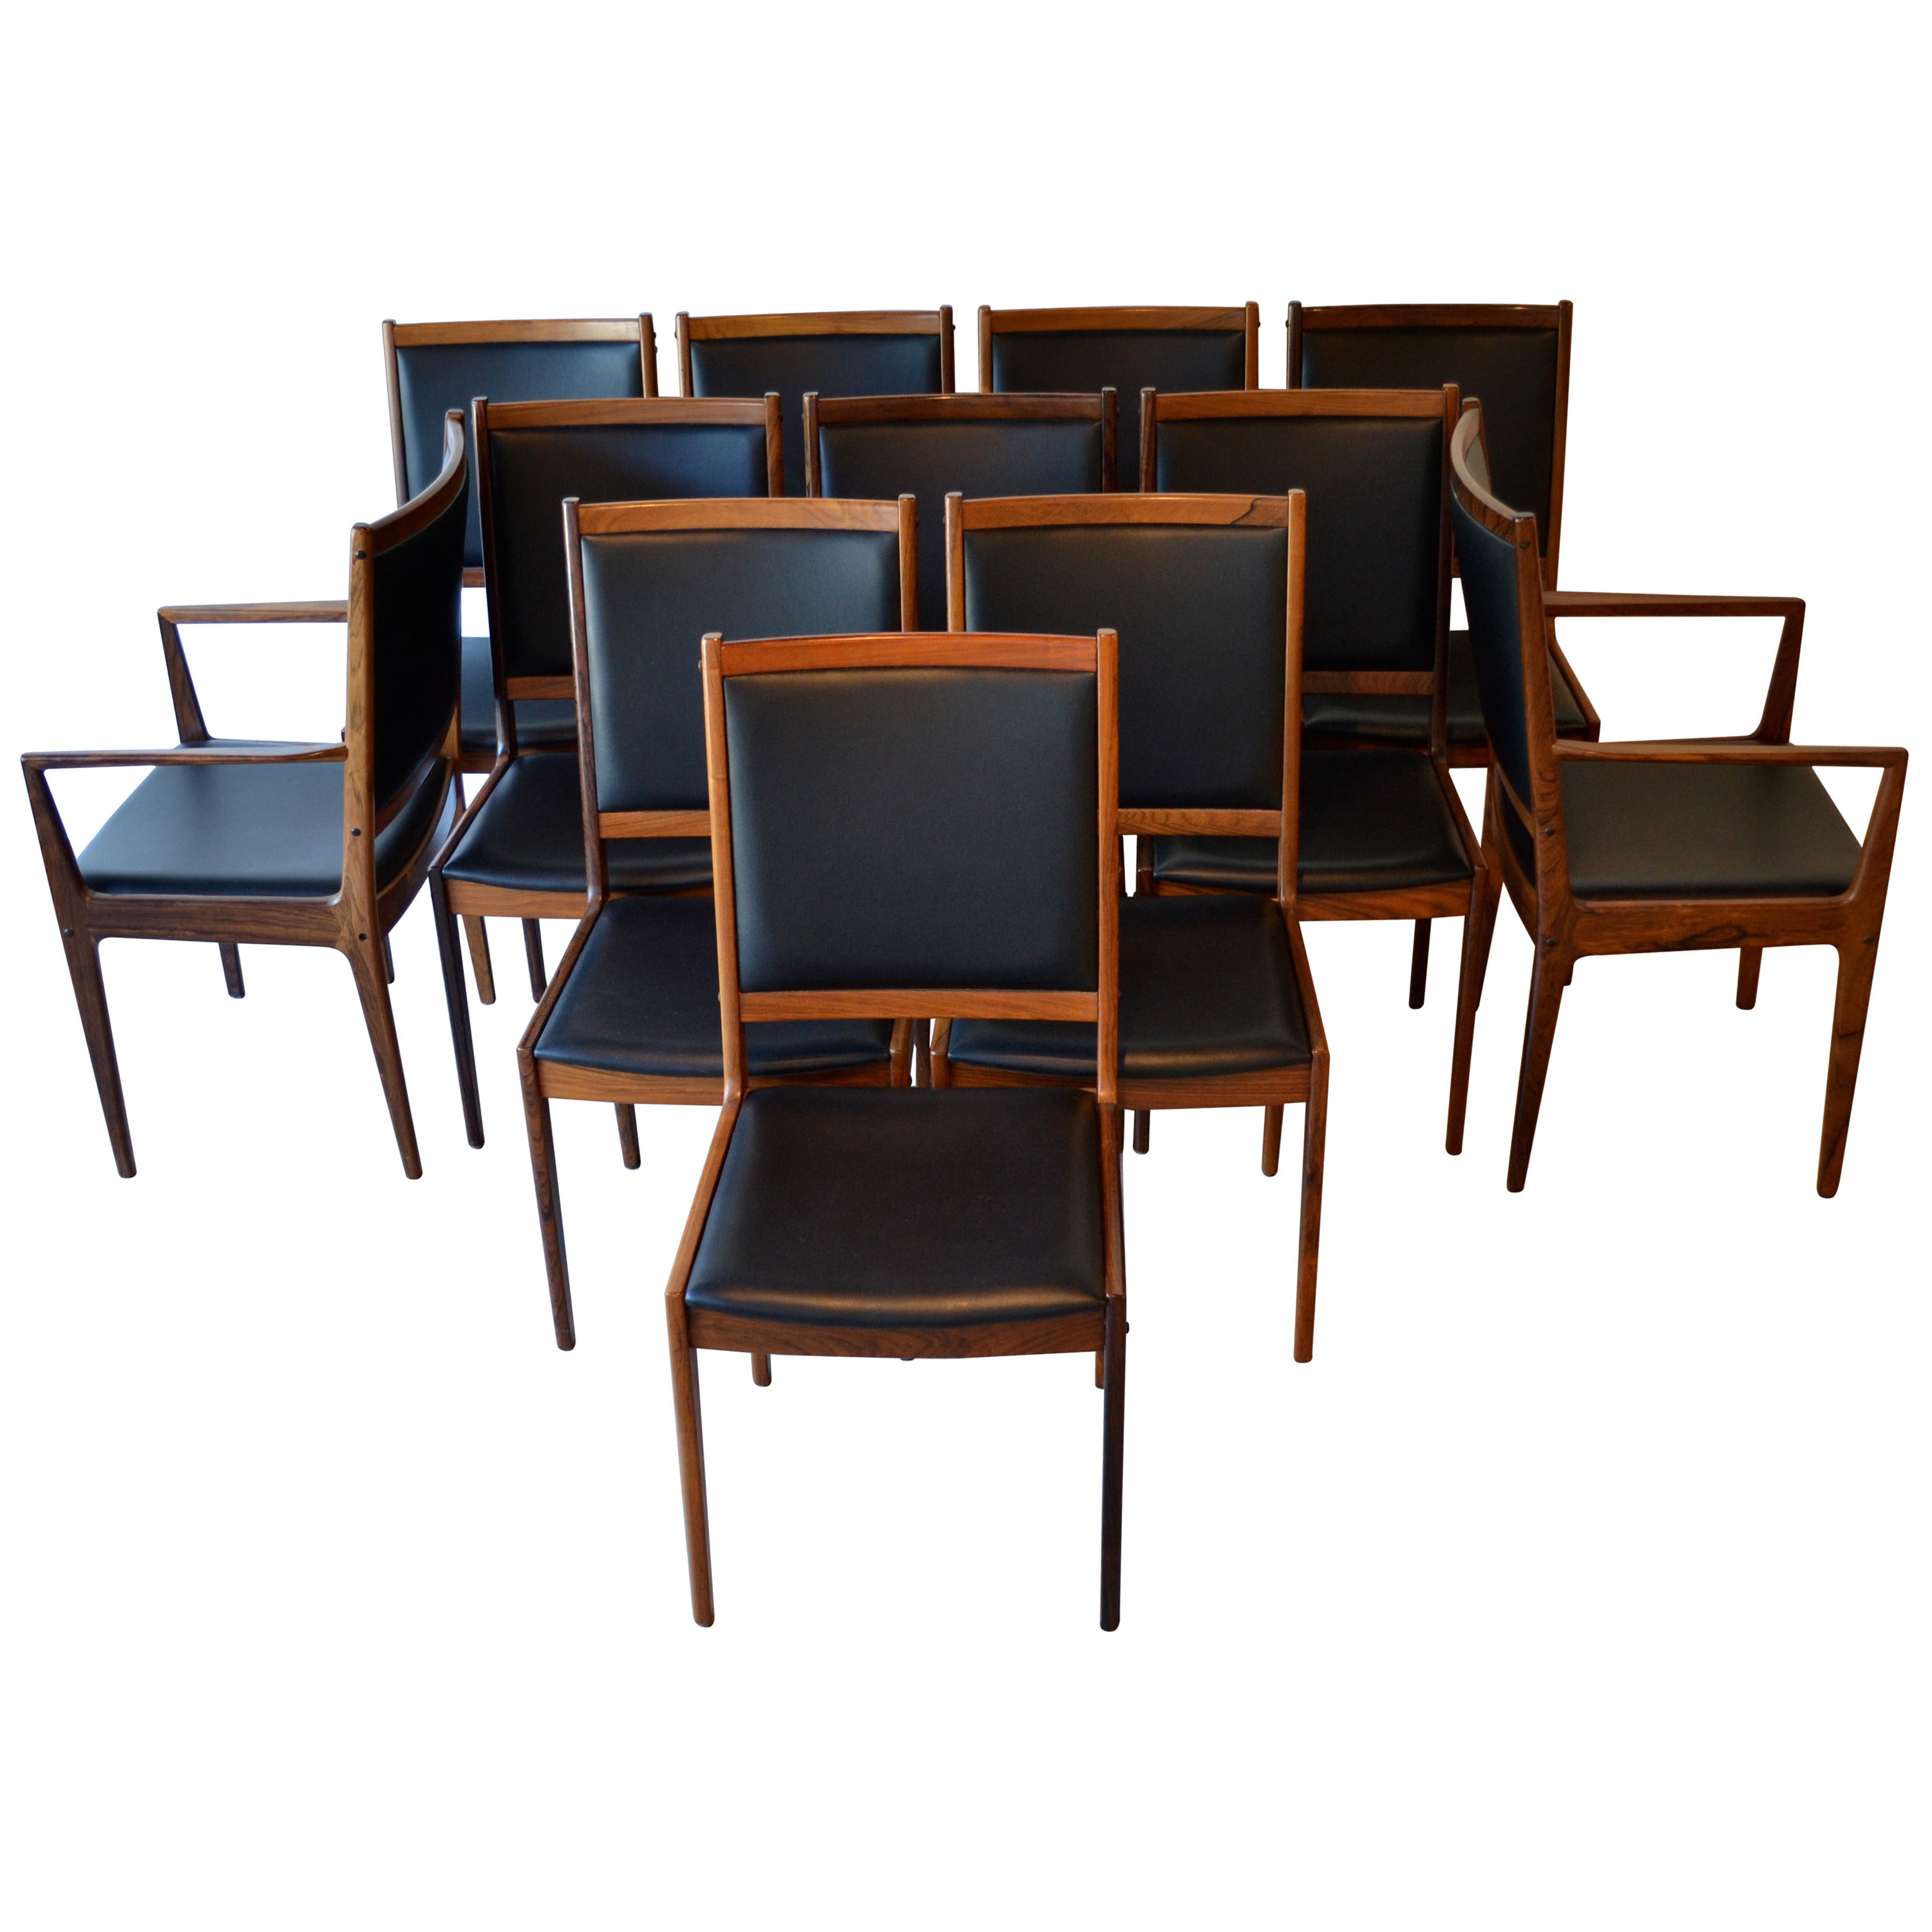 12 Rosewood and Leather Dining Chairs by JL Møller, Denmark, 1960's